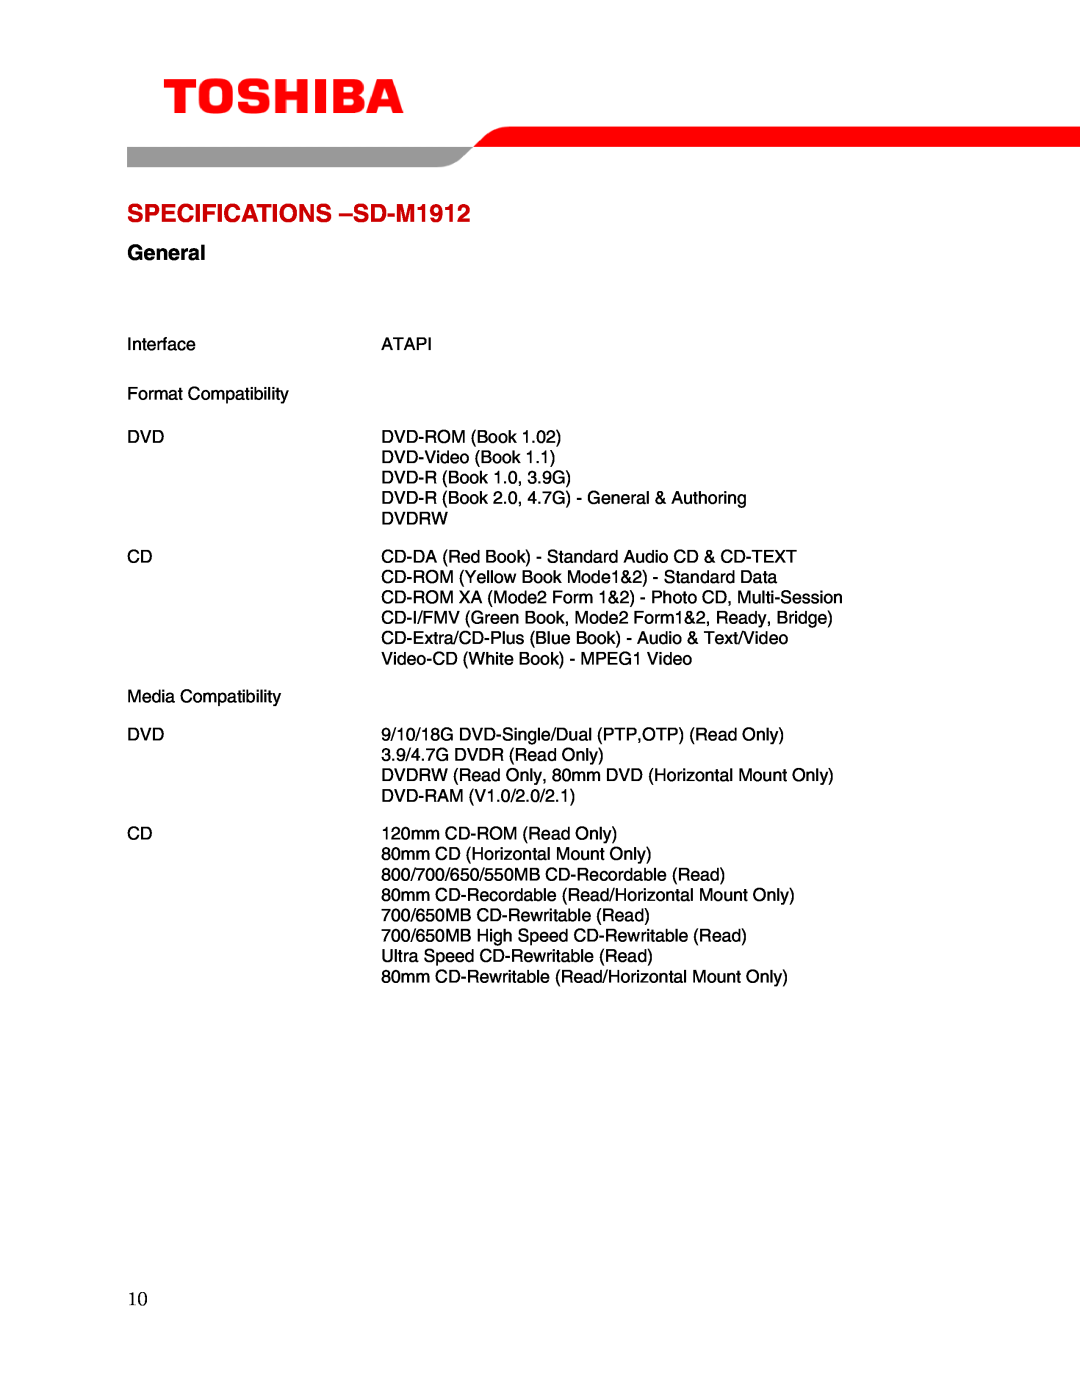 Toshiba user manual SPECIFICATIONS -SD-M1912, General 